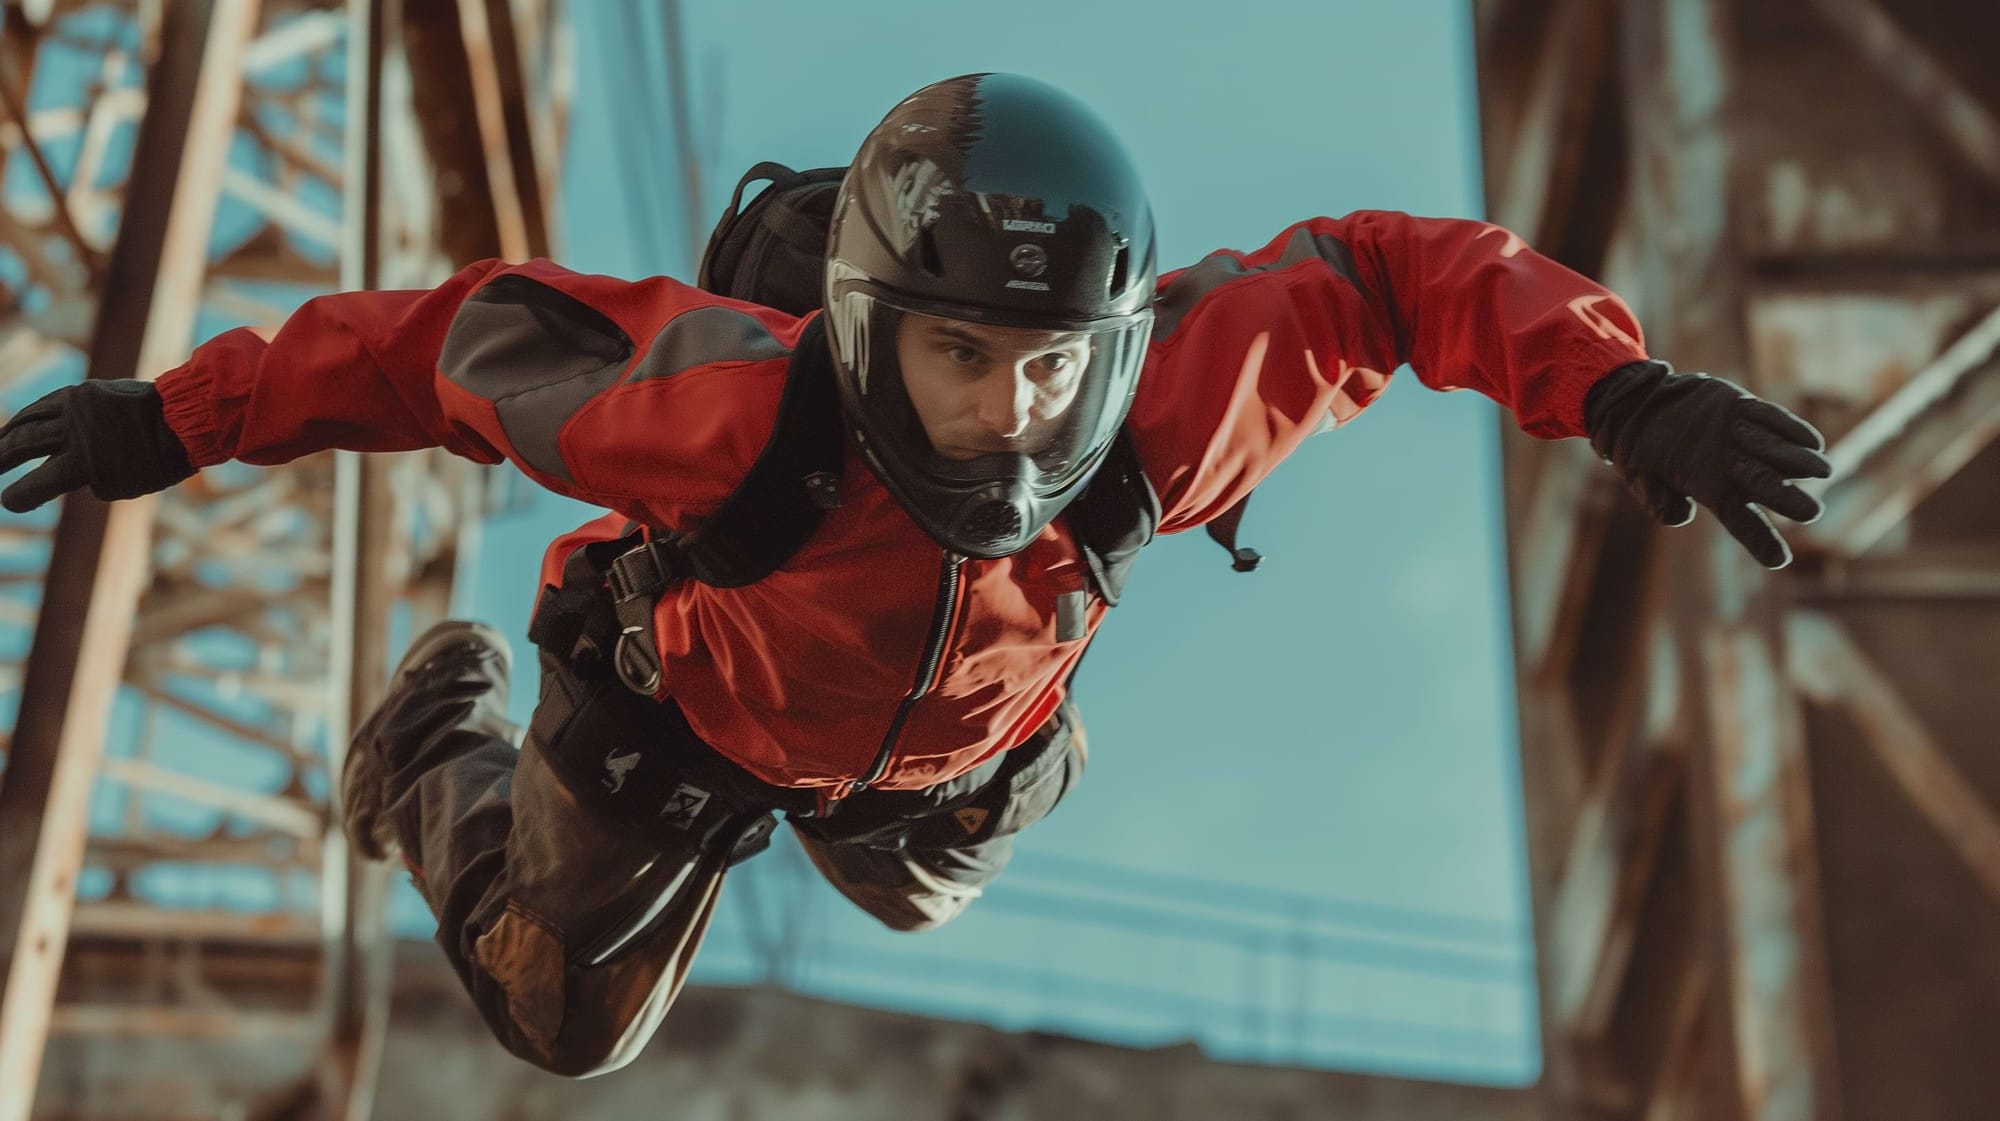 Mastering Stunt Budgeting and Safety in Filmmaking